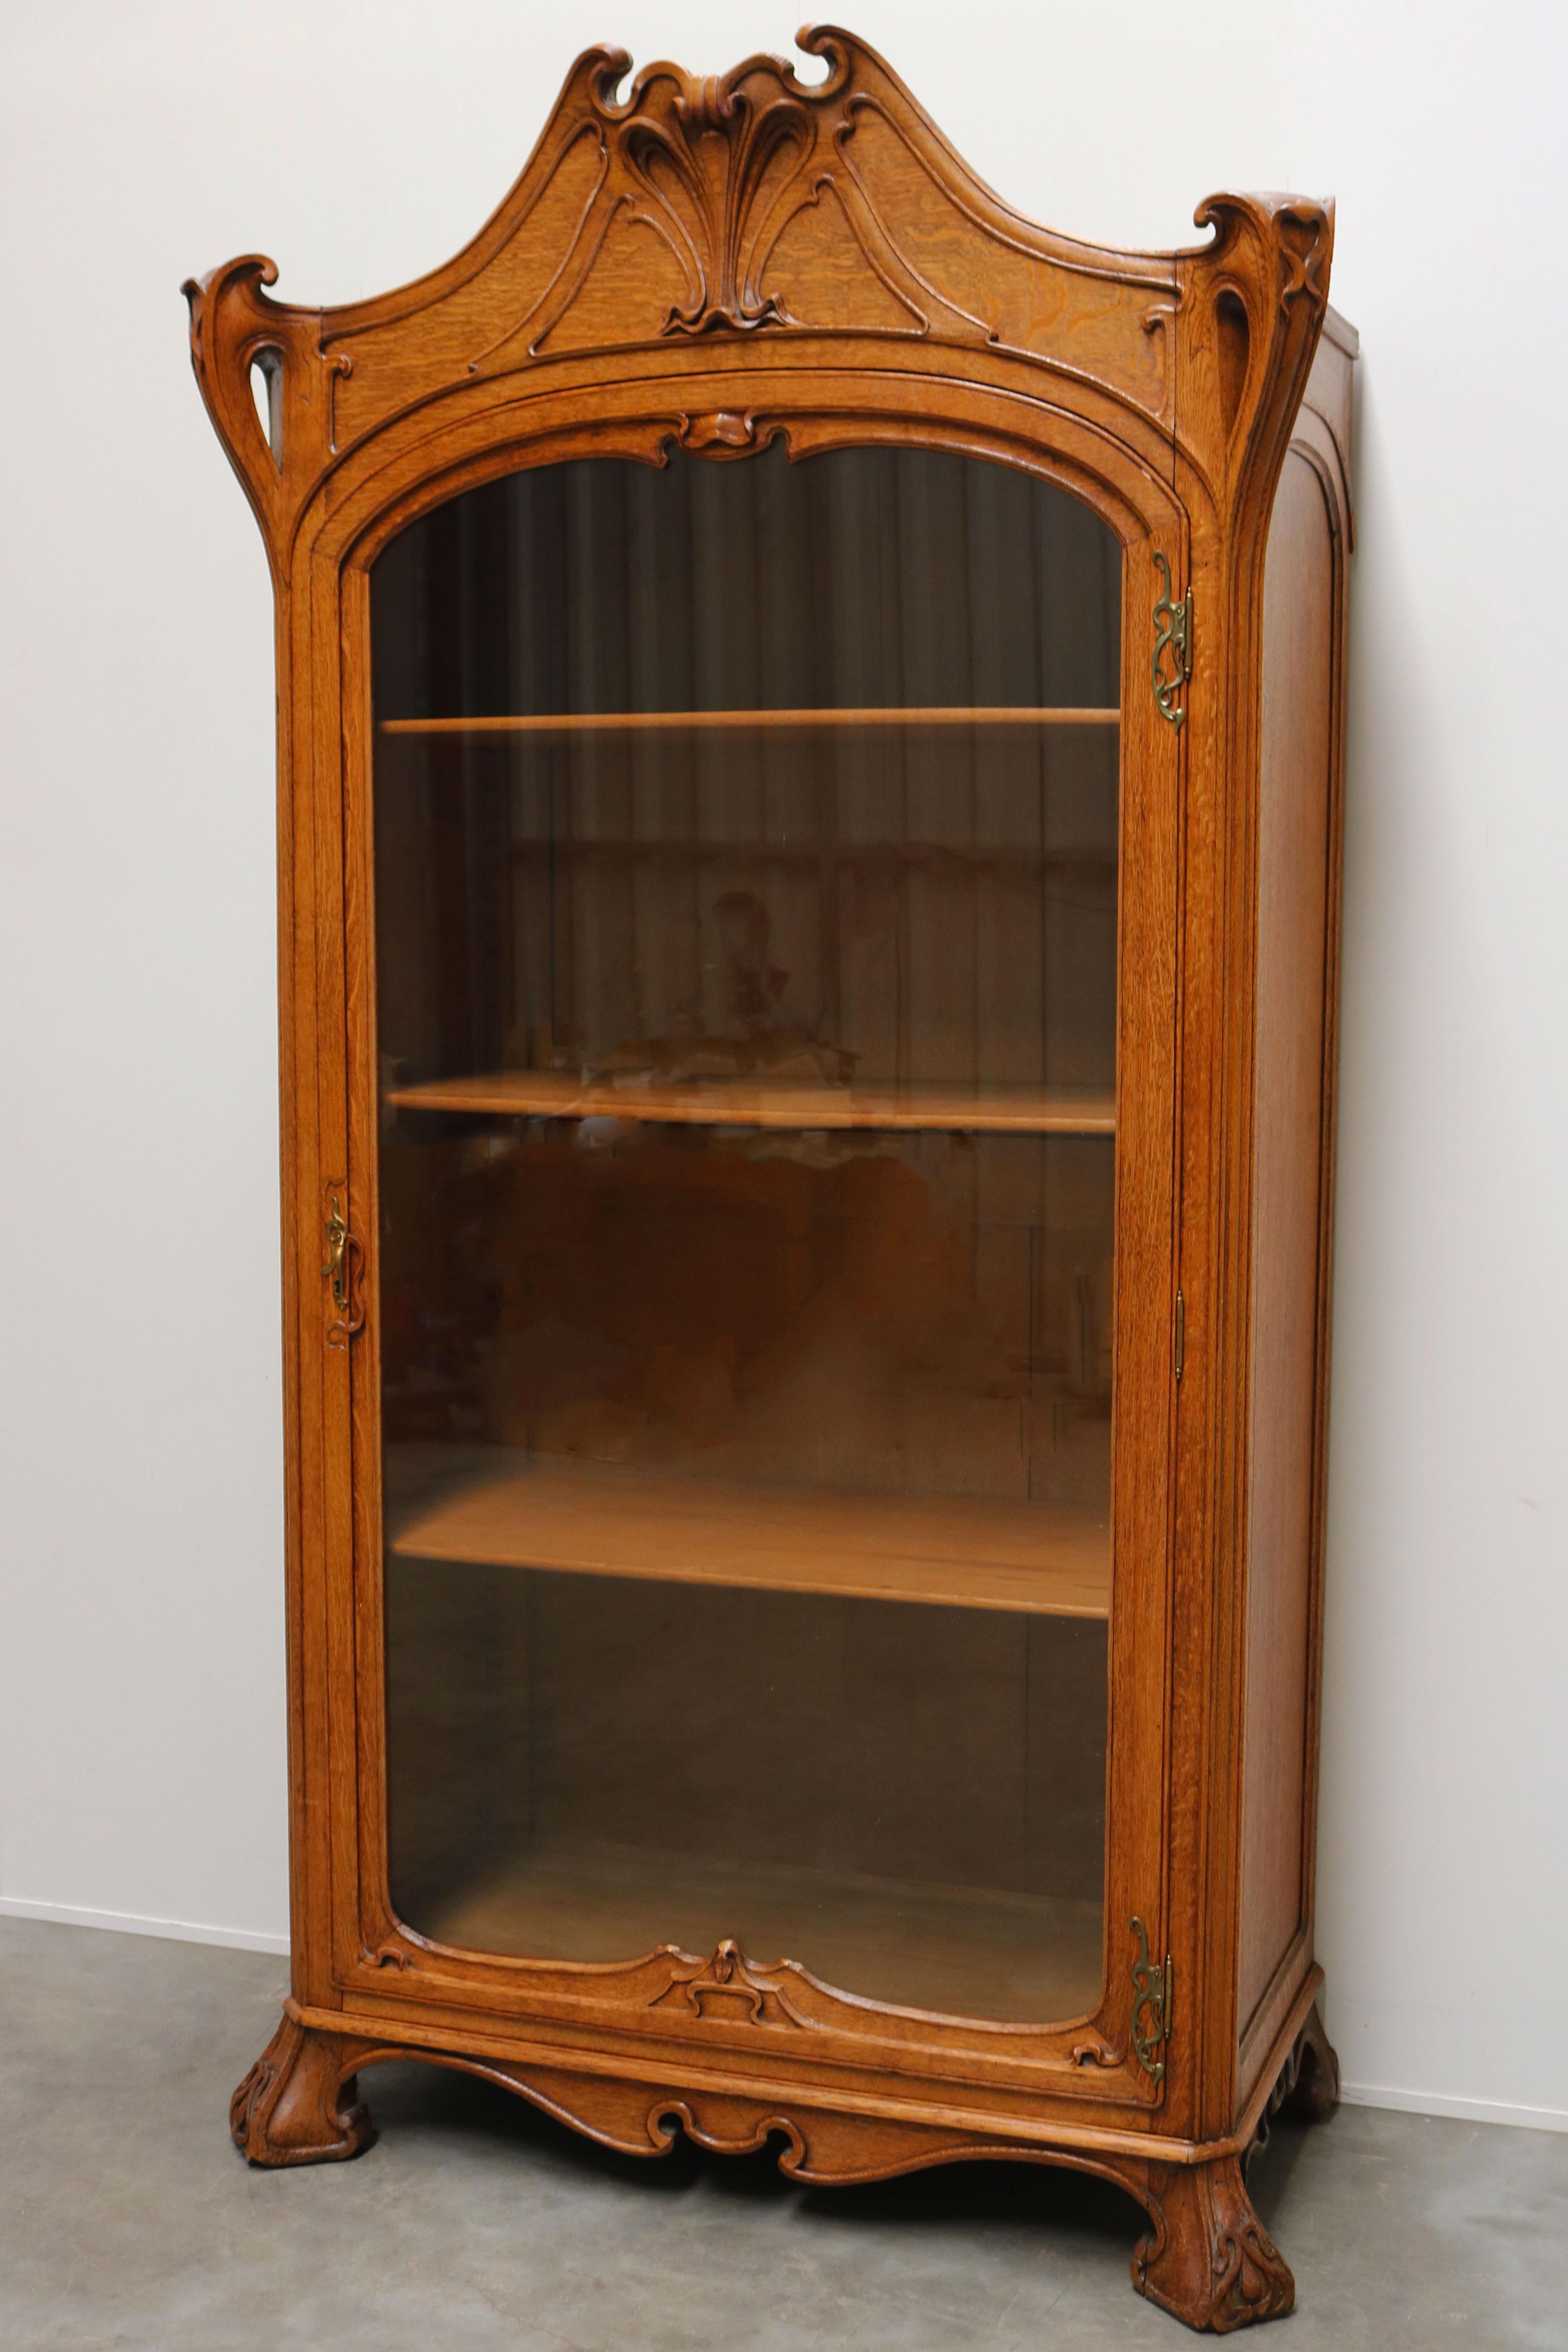 Brass Antique French Art Nouveau Cabinet by Henri Sauvage 1900 Oak Display Cabinet For Sale